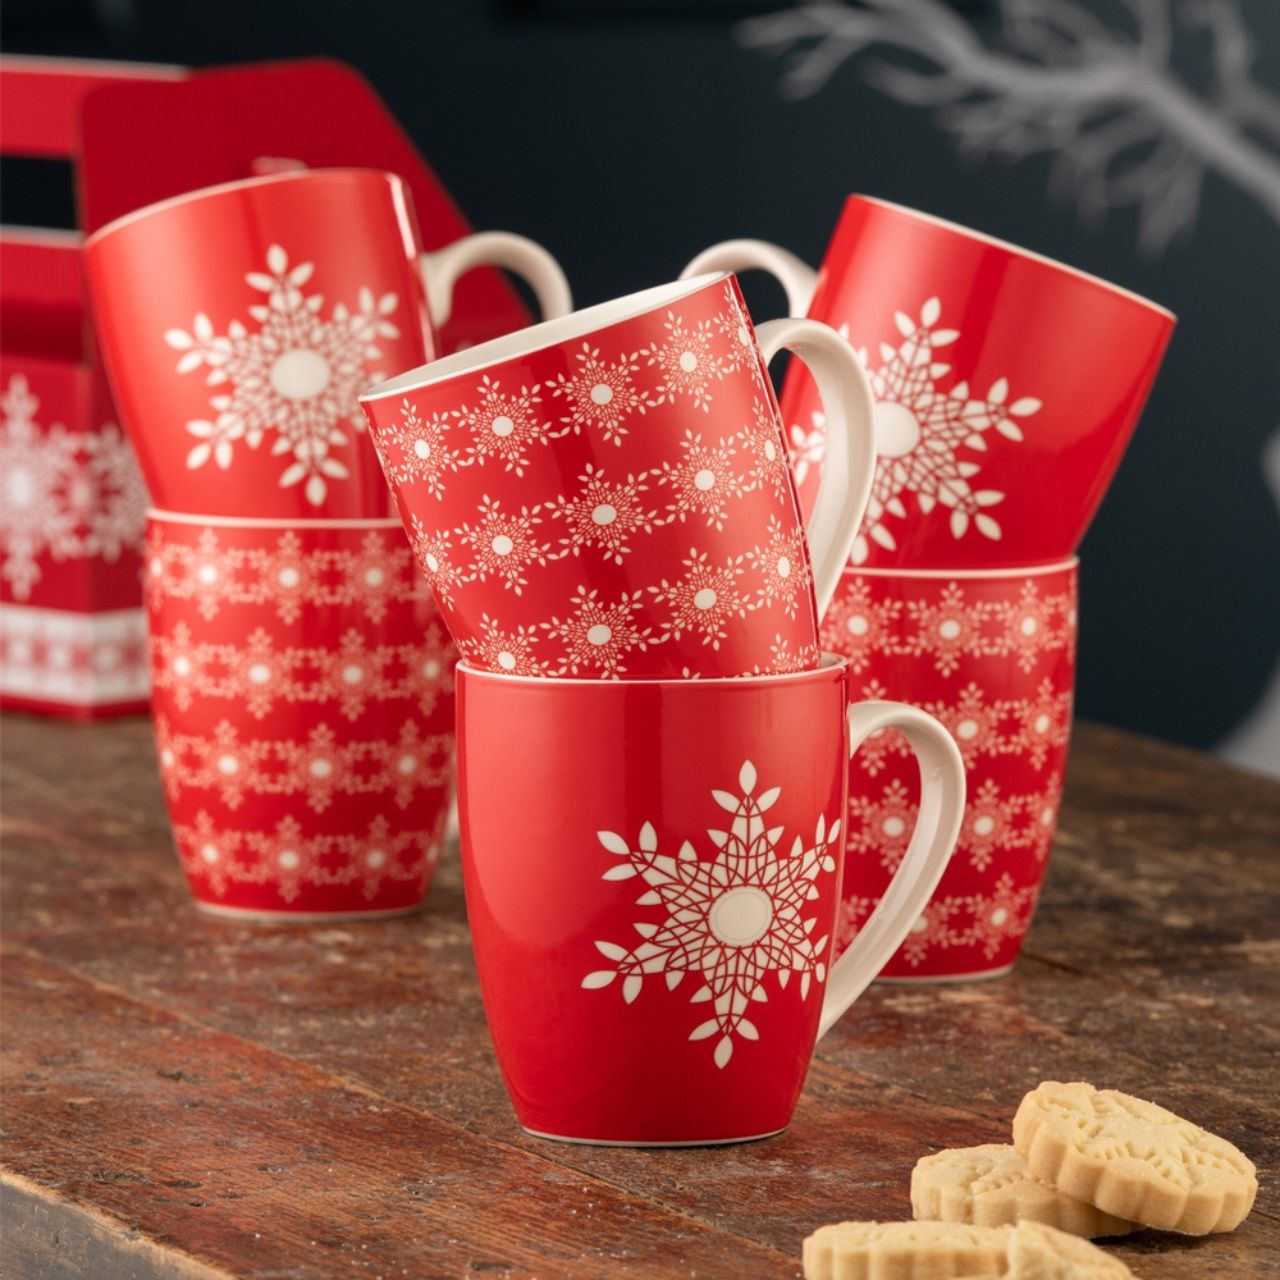 Snowflakes 6 Piece Mug Set Belleek Living  In traditional red and white, this mug set includes 6 mugs. Three of the mugs have an all over snowflake design and three of the mugs have a single snowflake motif. Made of new bone china, the handles and insides of the mugs are white.